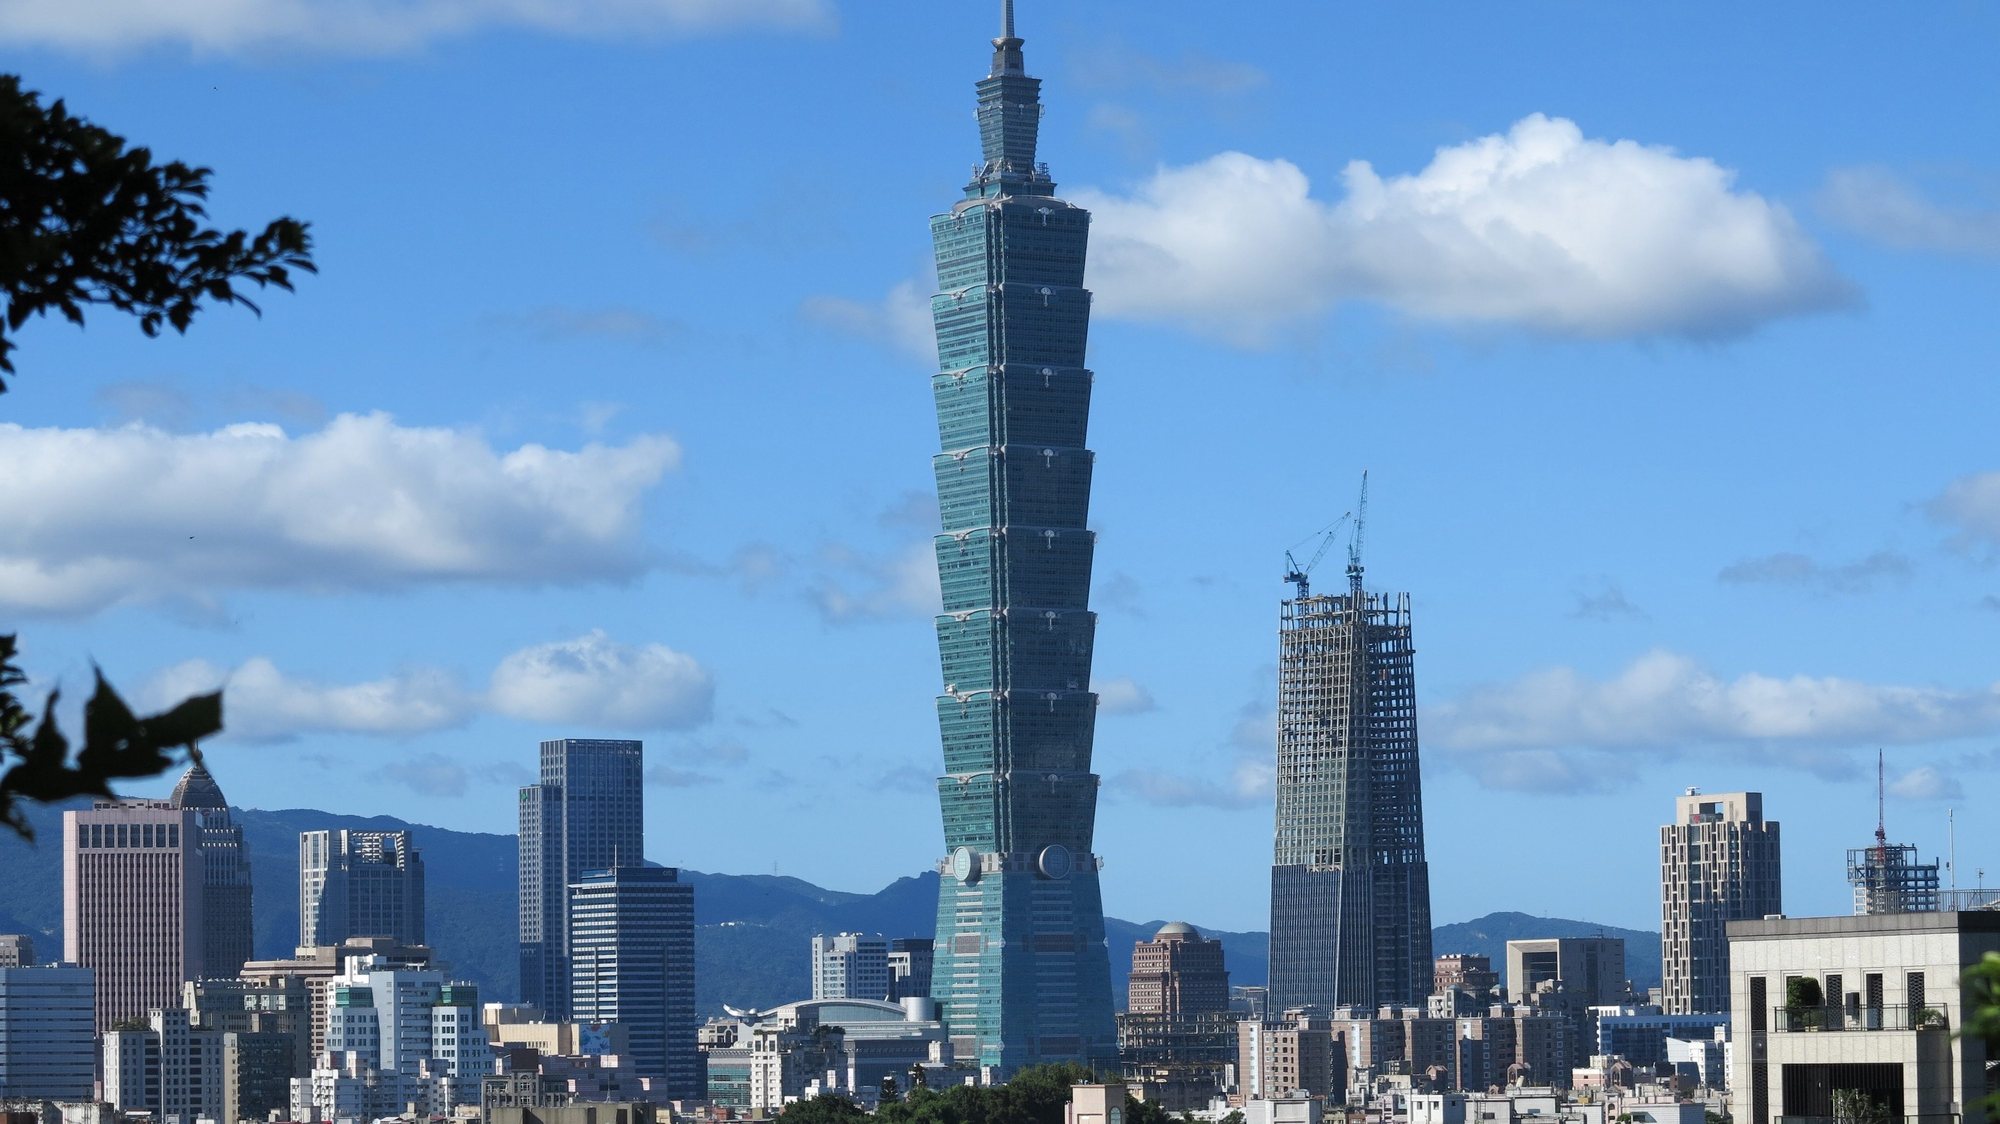 epa05426500 A photo made available on 15 July 2016 shows the Taipei 101 in Taipei, Taiwan, on 06 July 2016. On 15 July 2016, Taiwan announced that it will grant visa upon landing to Southeast Asian tourists. Starting 01 August 2016, people from Thailand and Brunei can visit Taiwan for 30 days under a trial programme lasting one year. Starting 01 September 2016, people from Indonesia, Vietnman, the Philippines, India, Myanmar, Cambodia and Laos - if within the past 10 years, they have acquired visa from the United States, Canada, the United Kingdom, Japan, Australia, New Zealand, South Korea and the Shengen Visa of the  European Union - can register online to apply for visa-free entry into Taiwan, Cabinet Spokesman Tong Chen-yuan said. He said that Taiwan hopes to attract 280,000 Southeast Asian visitors a year after the visa-upon-landing plan is launched. Taiwan received more than 10 million overseas visitors last year, and among these, four million were Chinese tourists. Tawian hopes to deversify the source of foreign tourists and wants to attract more Southeast and Muslim tourists.  EPA/DAVID CHANG